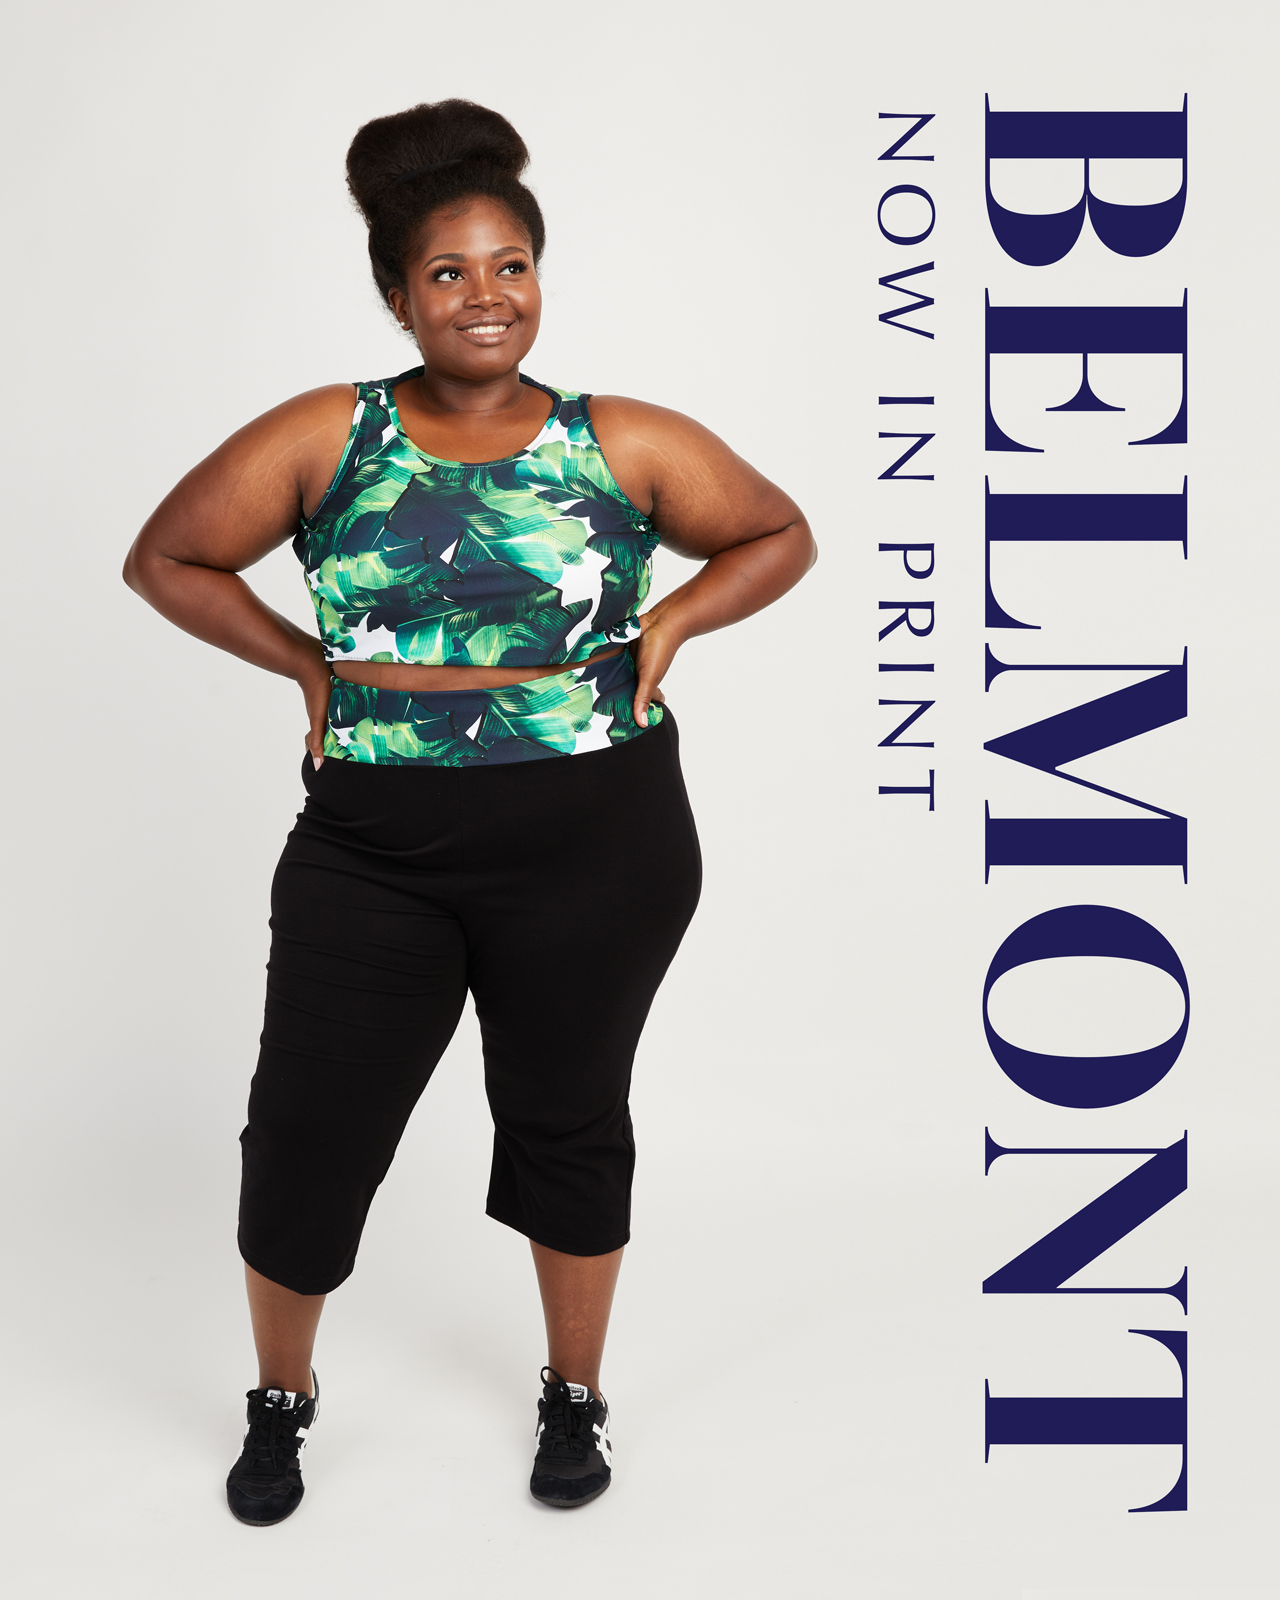 Belmont Leggings, now in print! Plus activewear collection in sizes 12-32